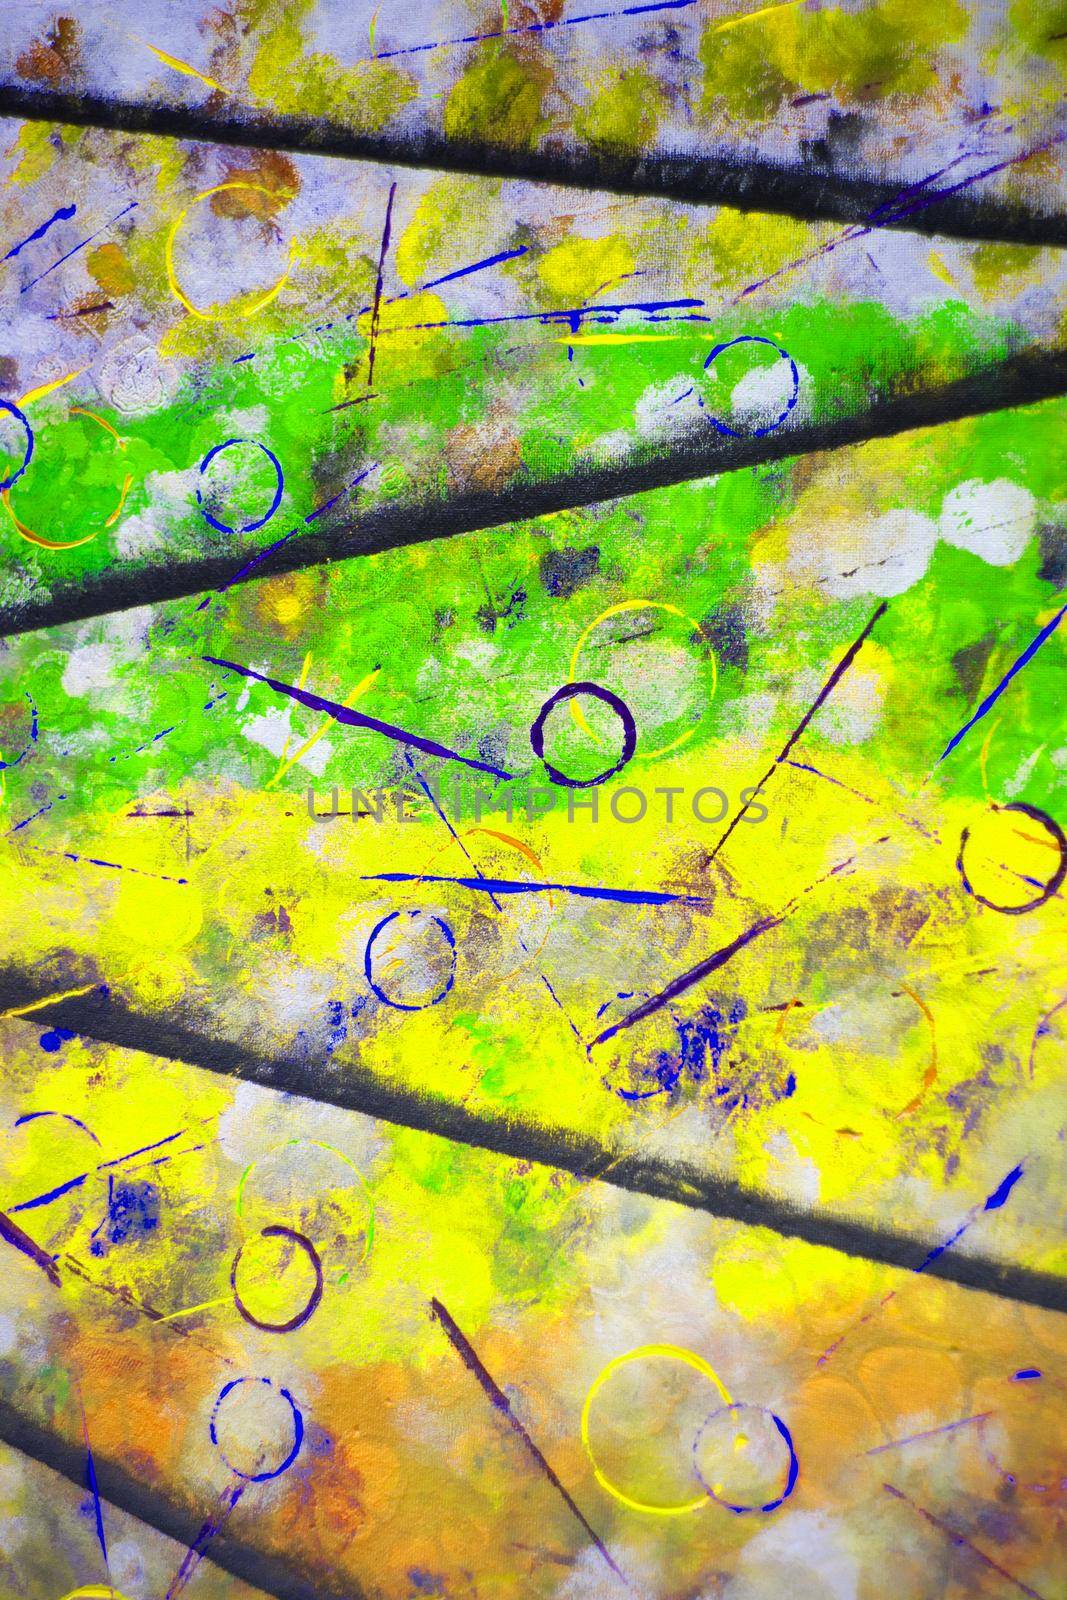 Element of abstract acrylic painting. Circles and lines of different colors - image